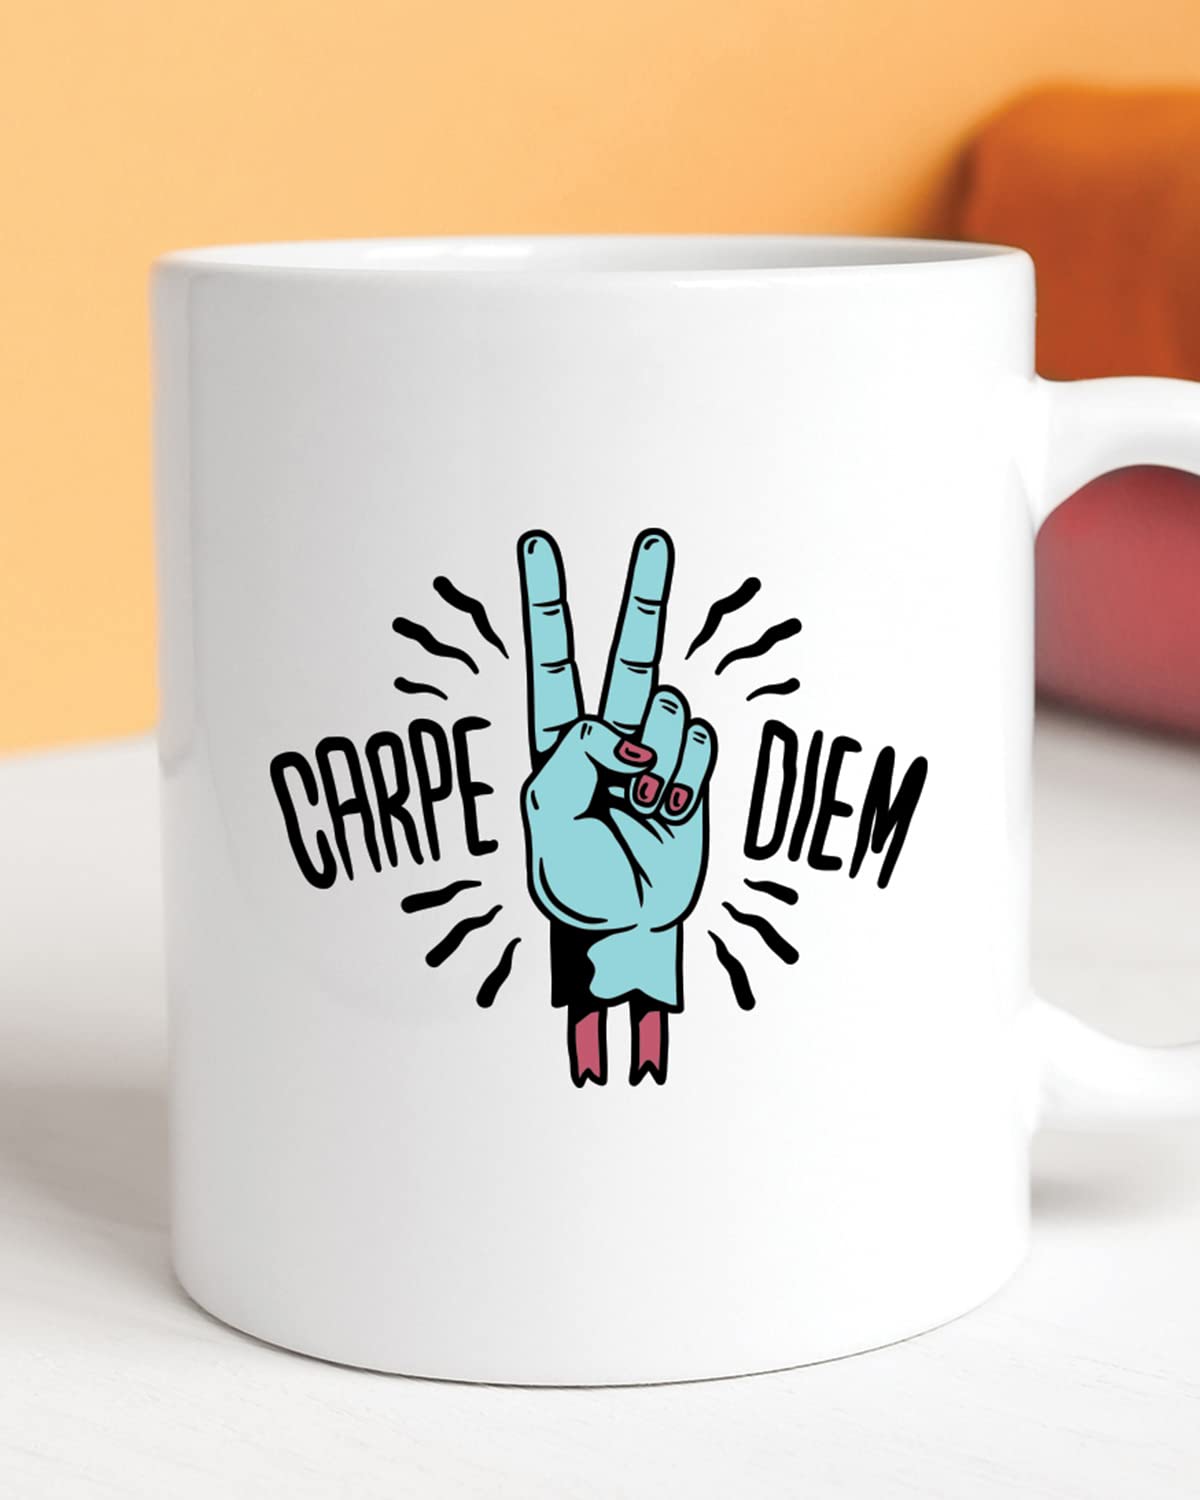 Carpe Diem Coffee Mug - Birthday Gift, Motivational Mug, Printed with Inspiring Quotes, Positivity Mug, Inspirational Gift for Him & Her, Best Friend Gift, Gifts for Her, Cheer Up Gift